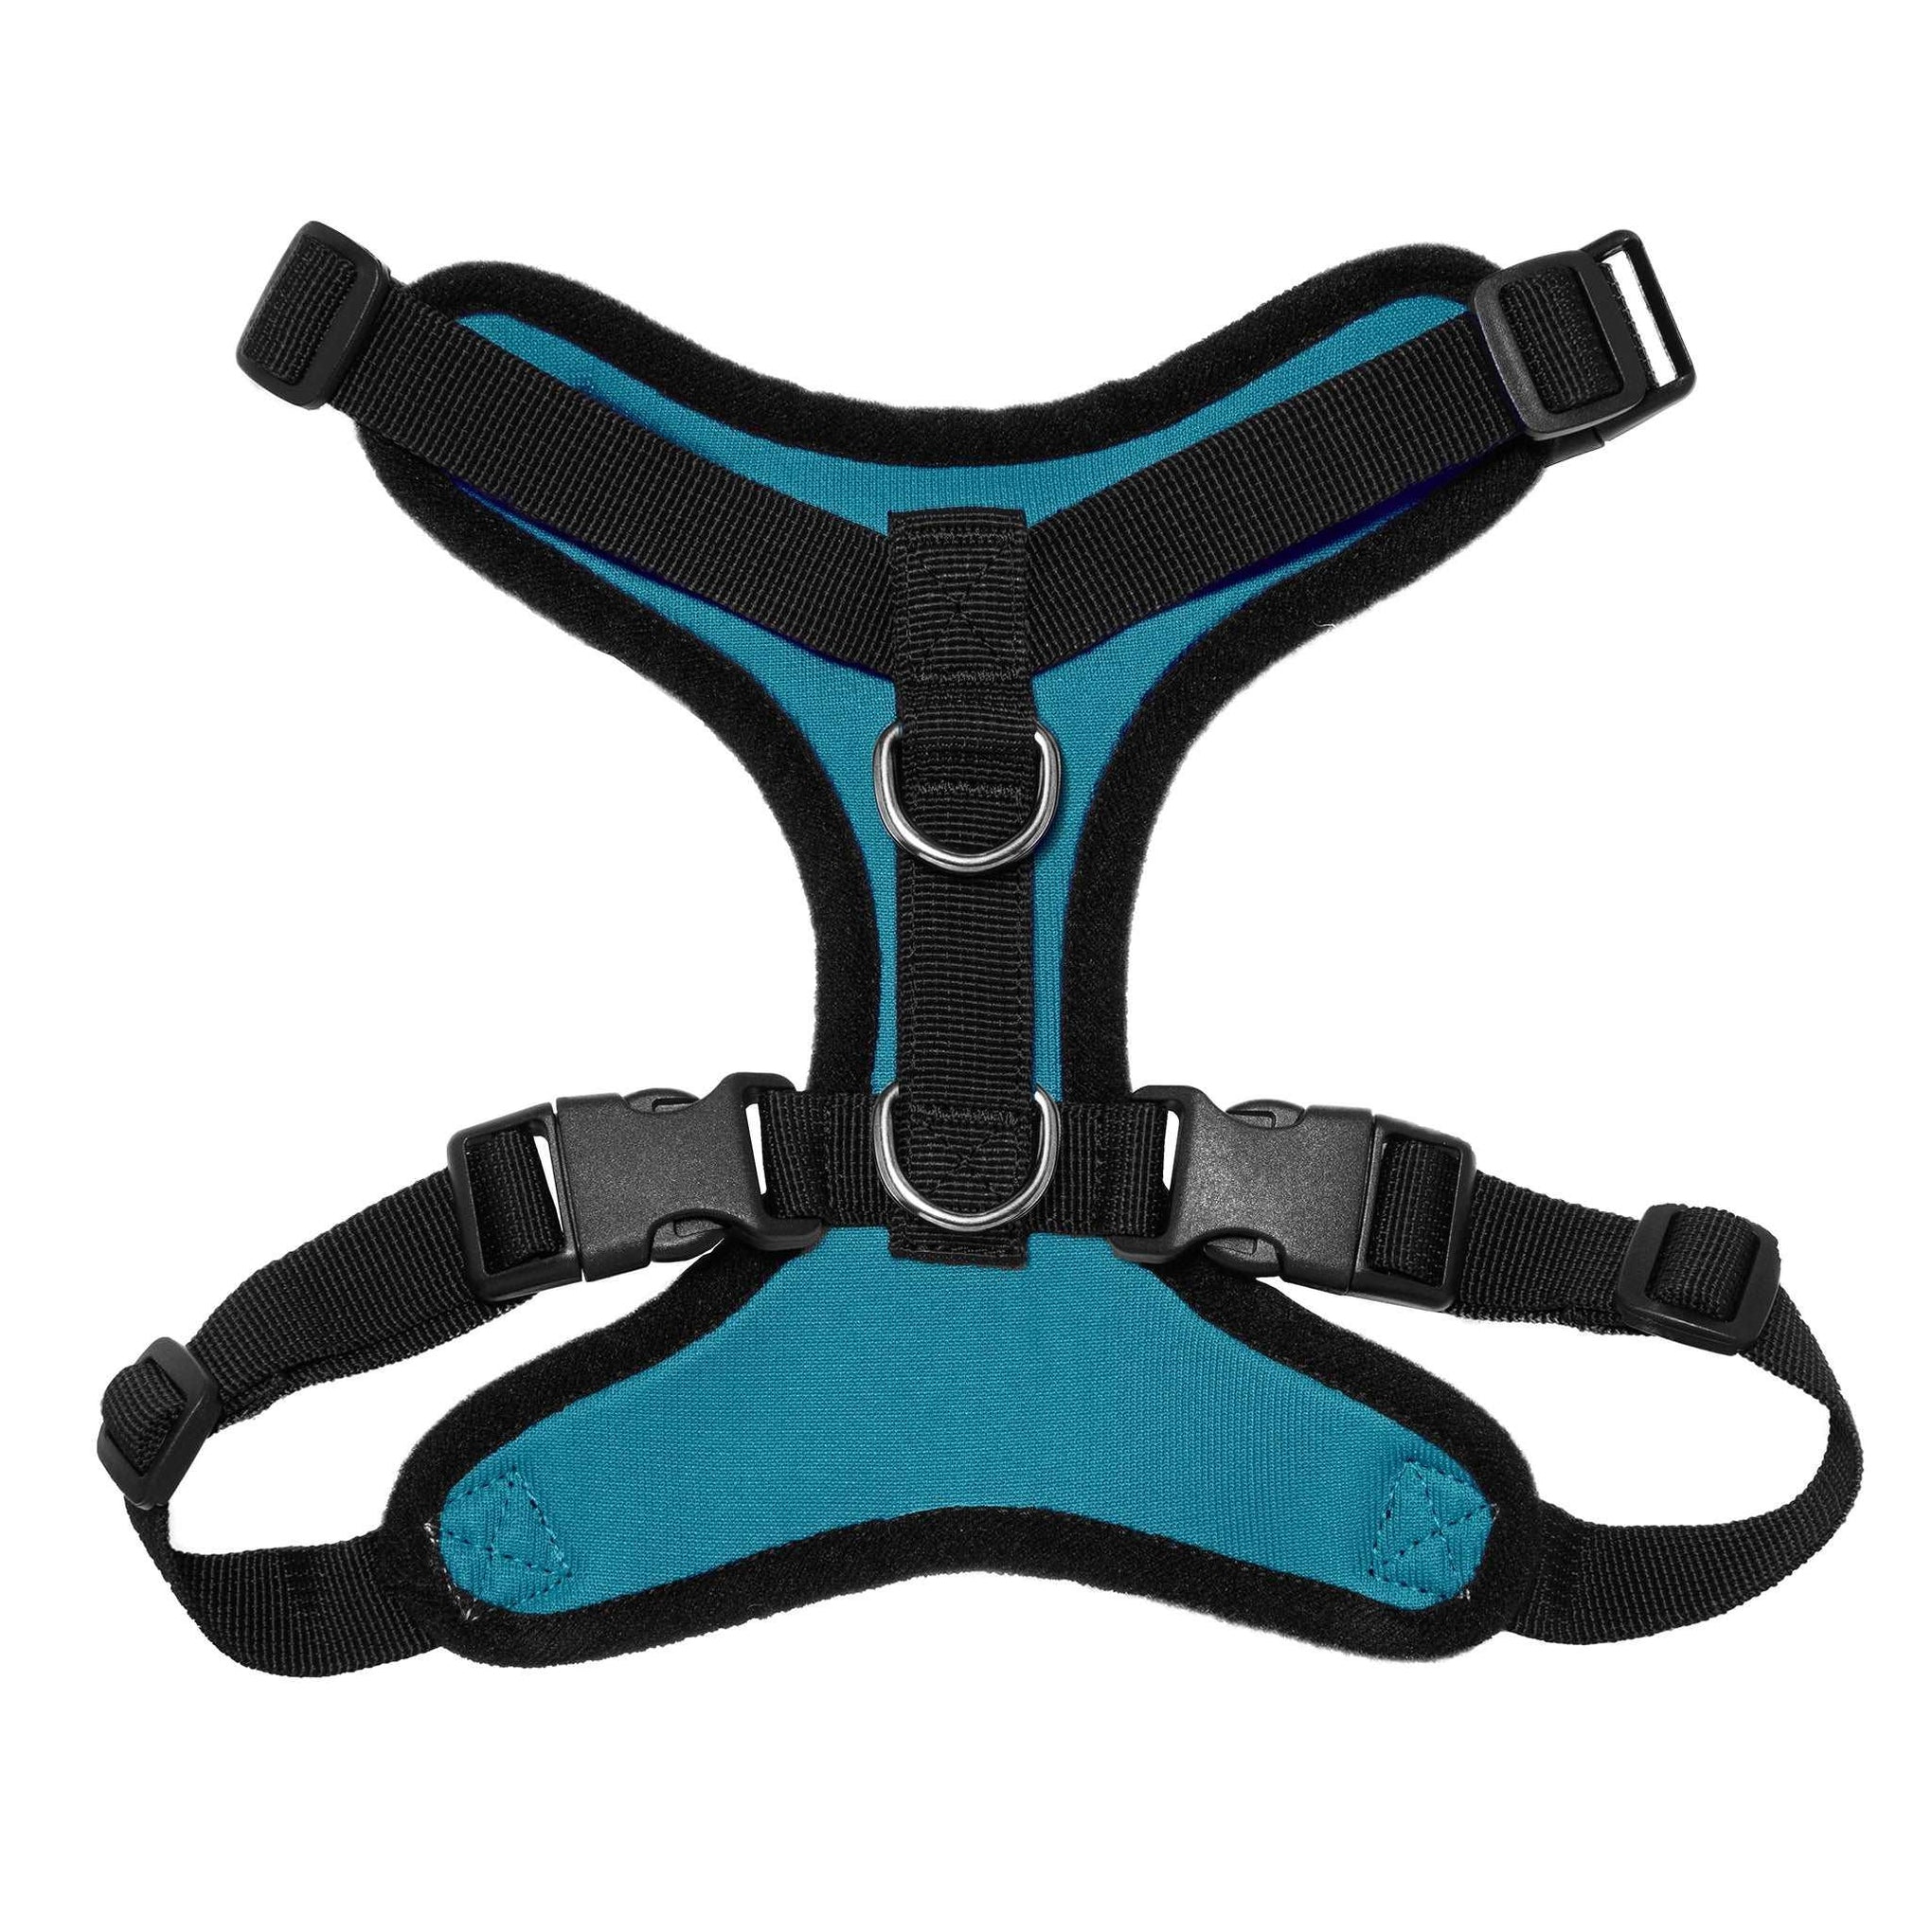 voyager step in dog harness uk